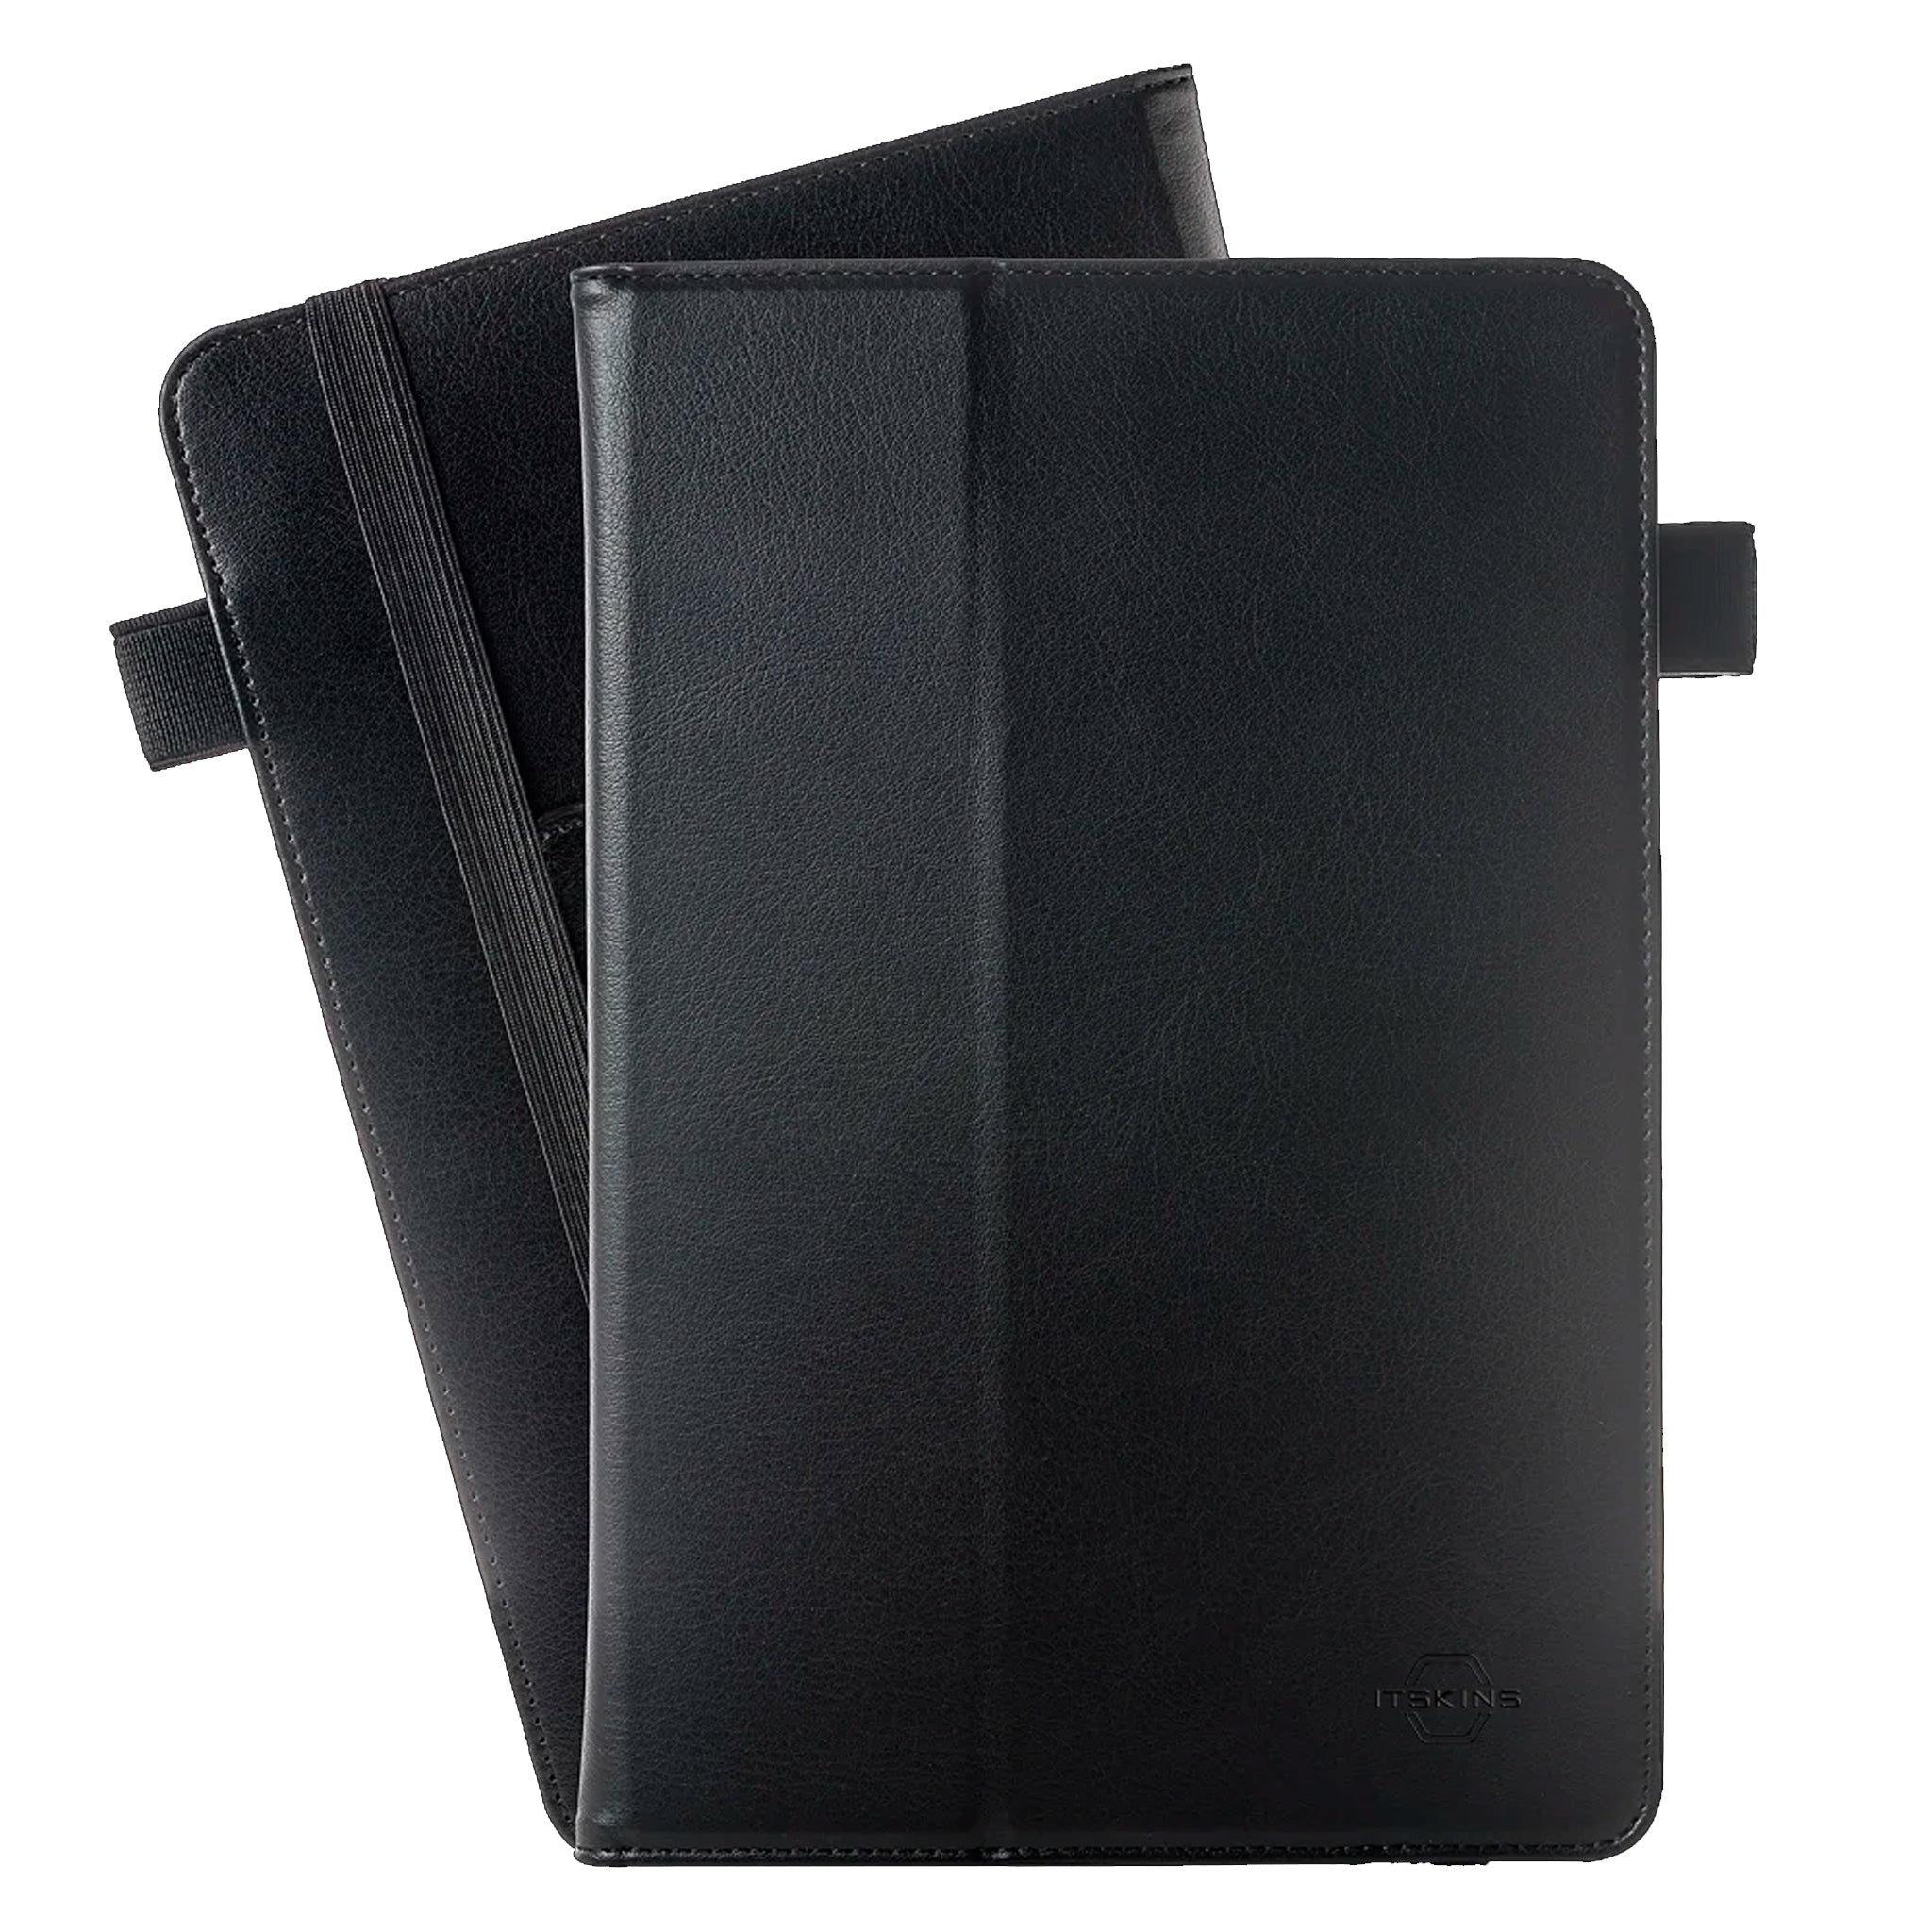 Itskins - Universal Folio Case For 7 To 8 Inch Tablets - Black